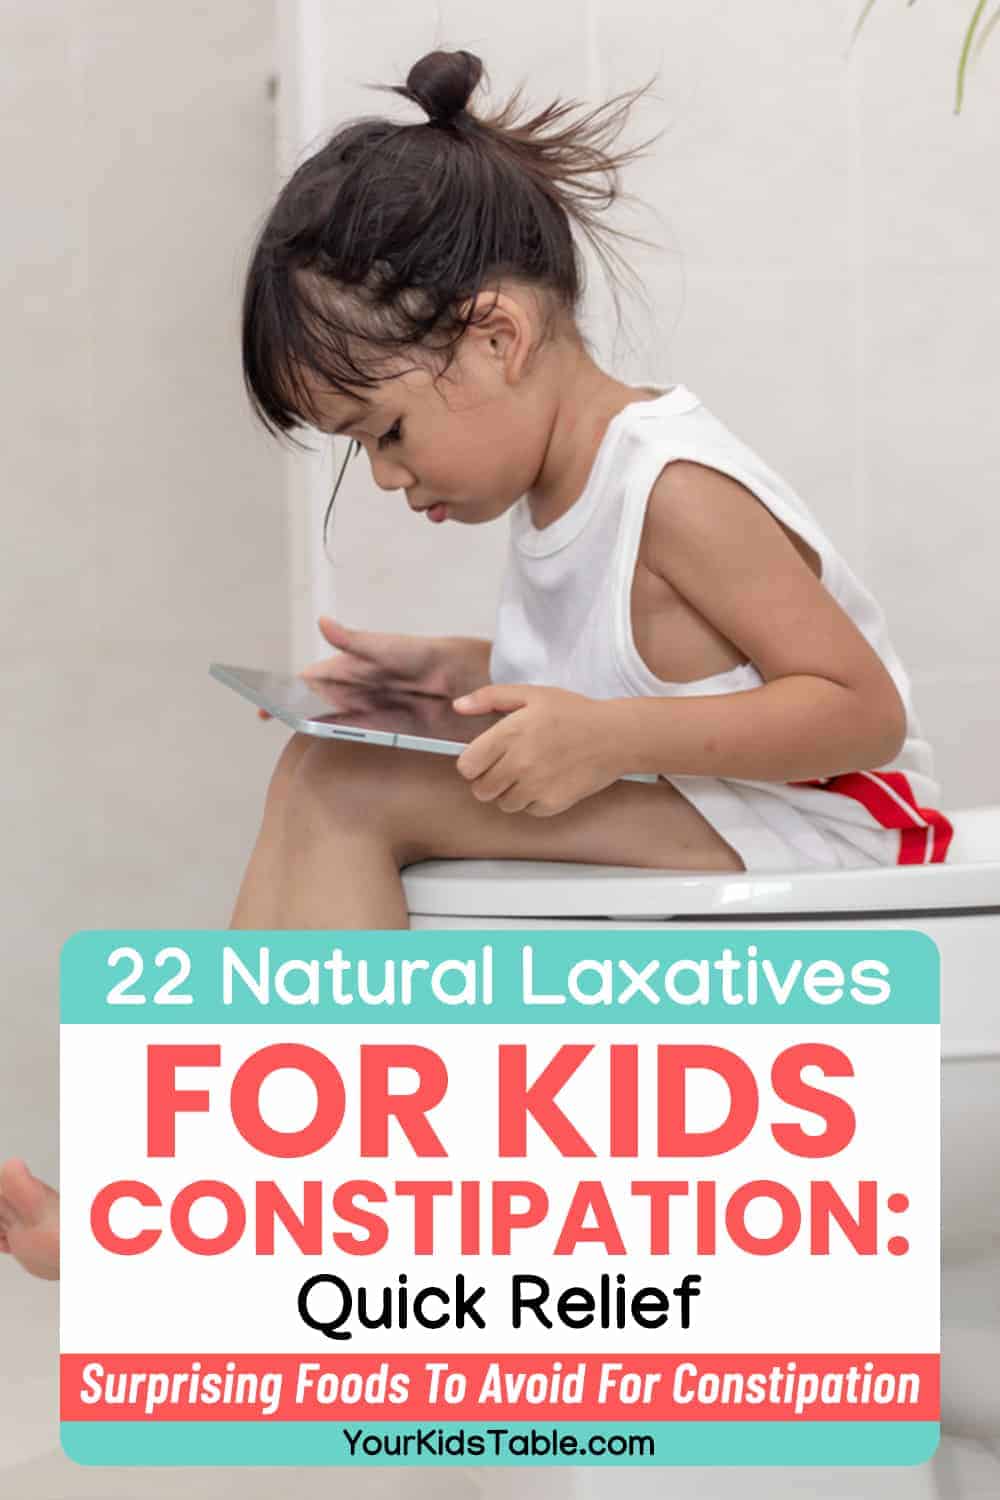 Learn about natural laxatives for kids constipation to give them quick relief, without the use of Miralax as a stool softner. 